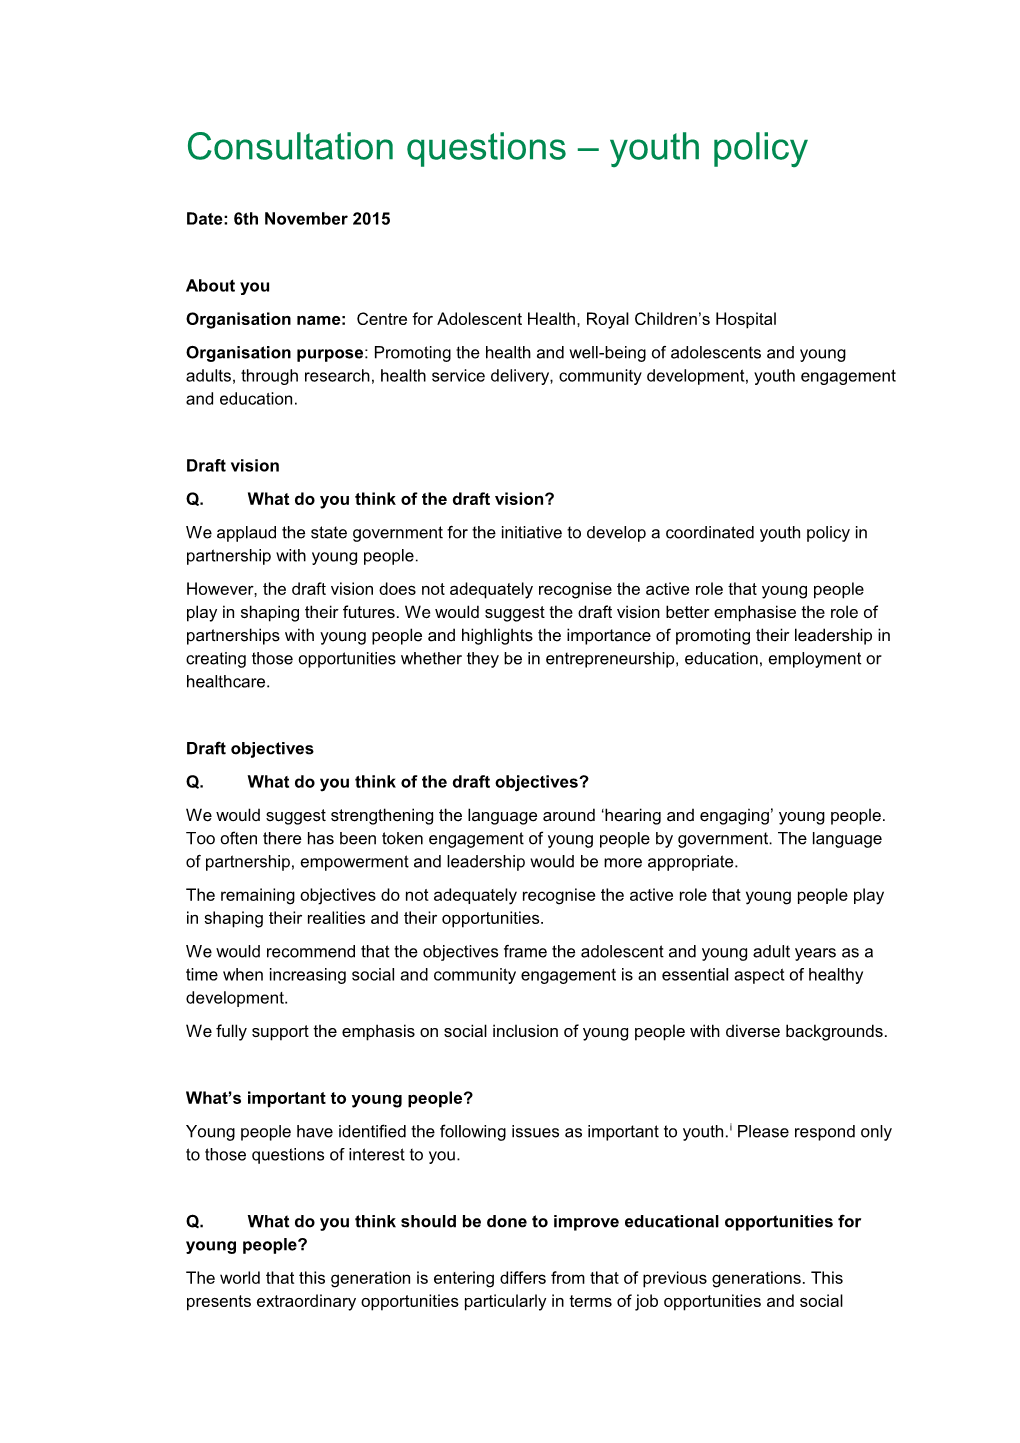 Consultation Questions Youth Policy